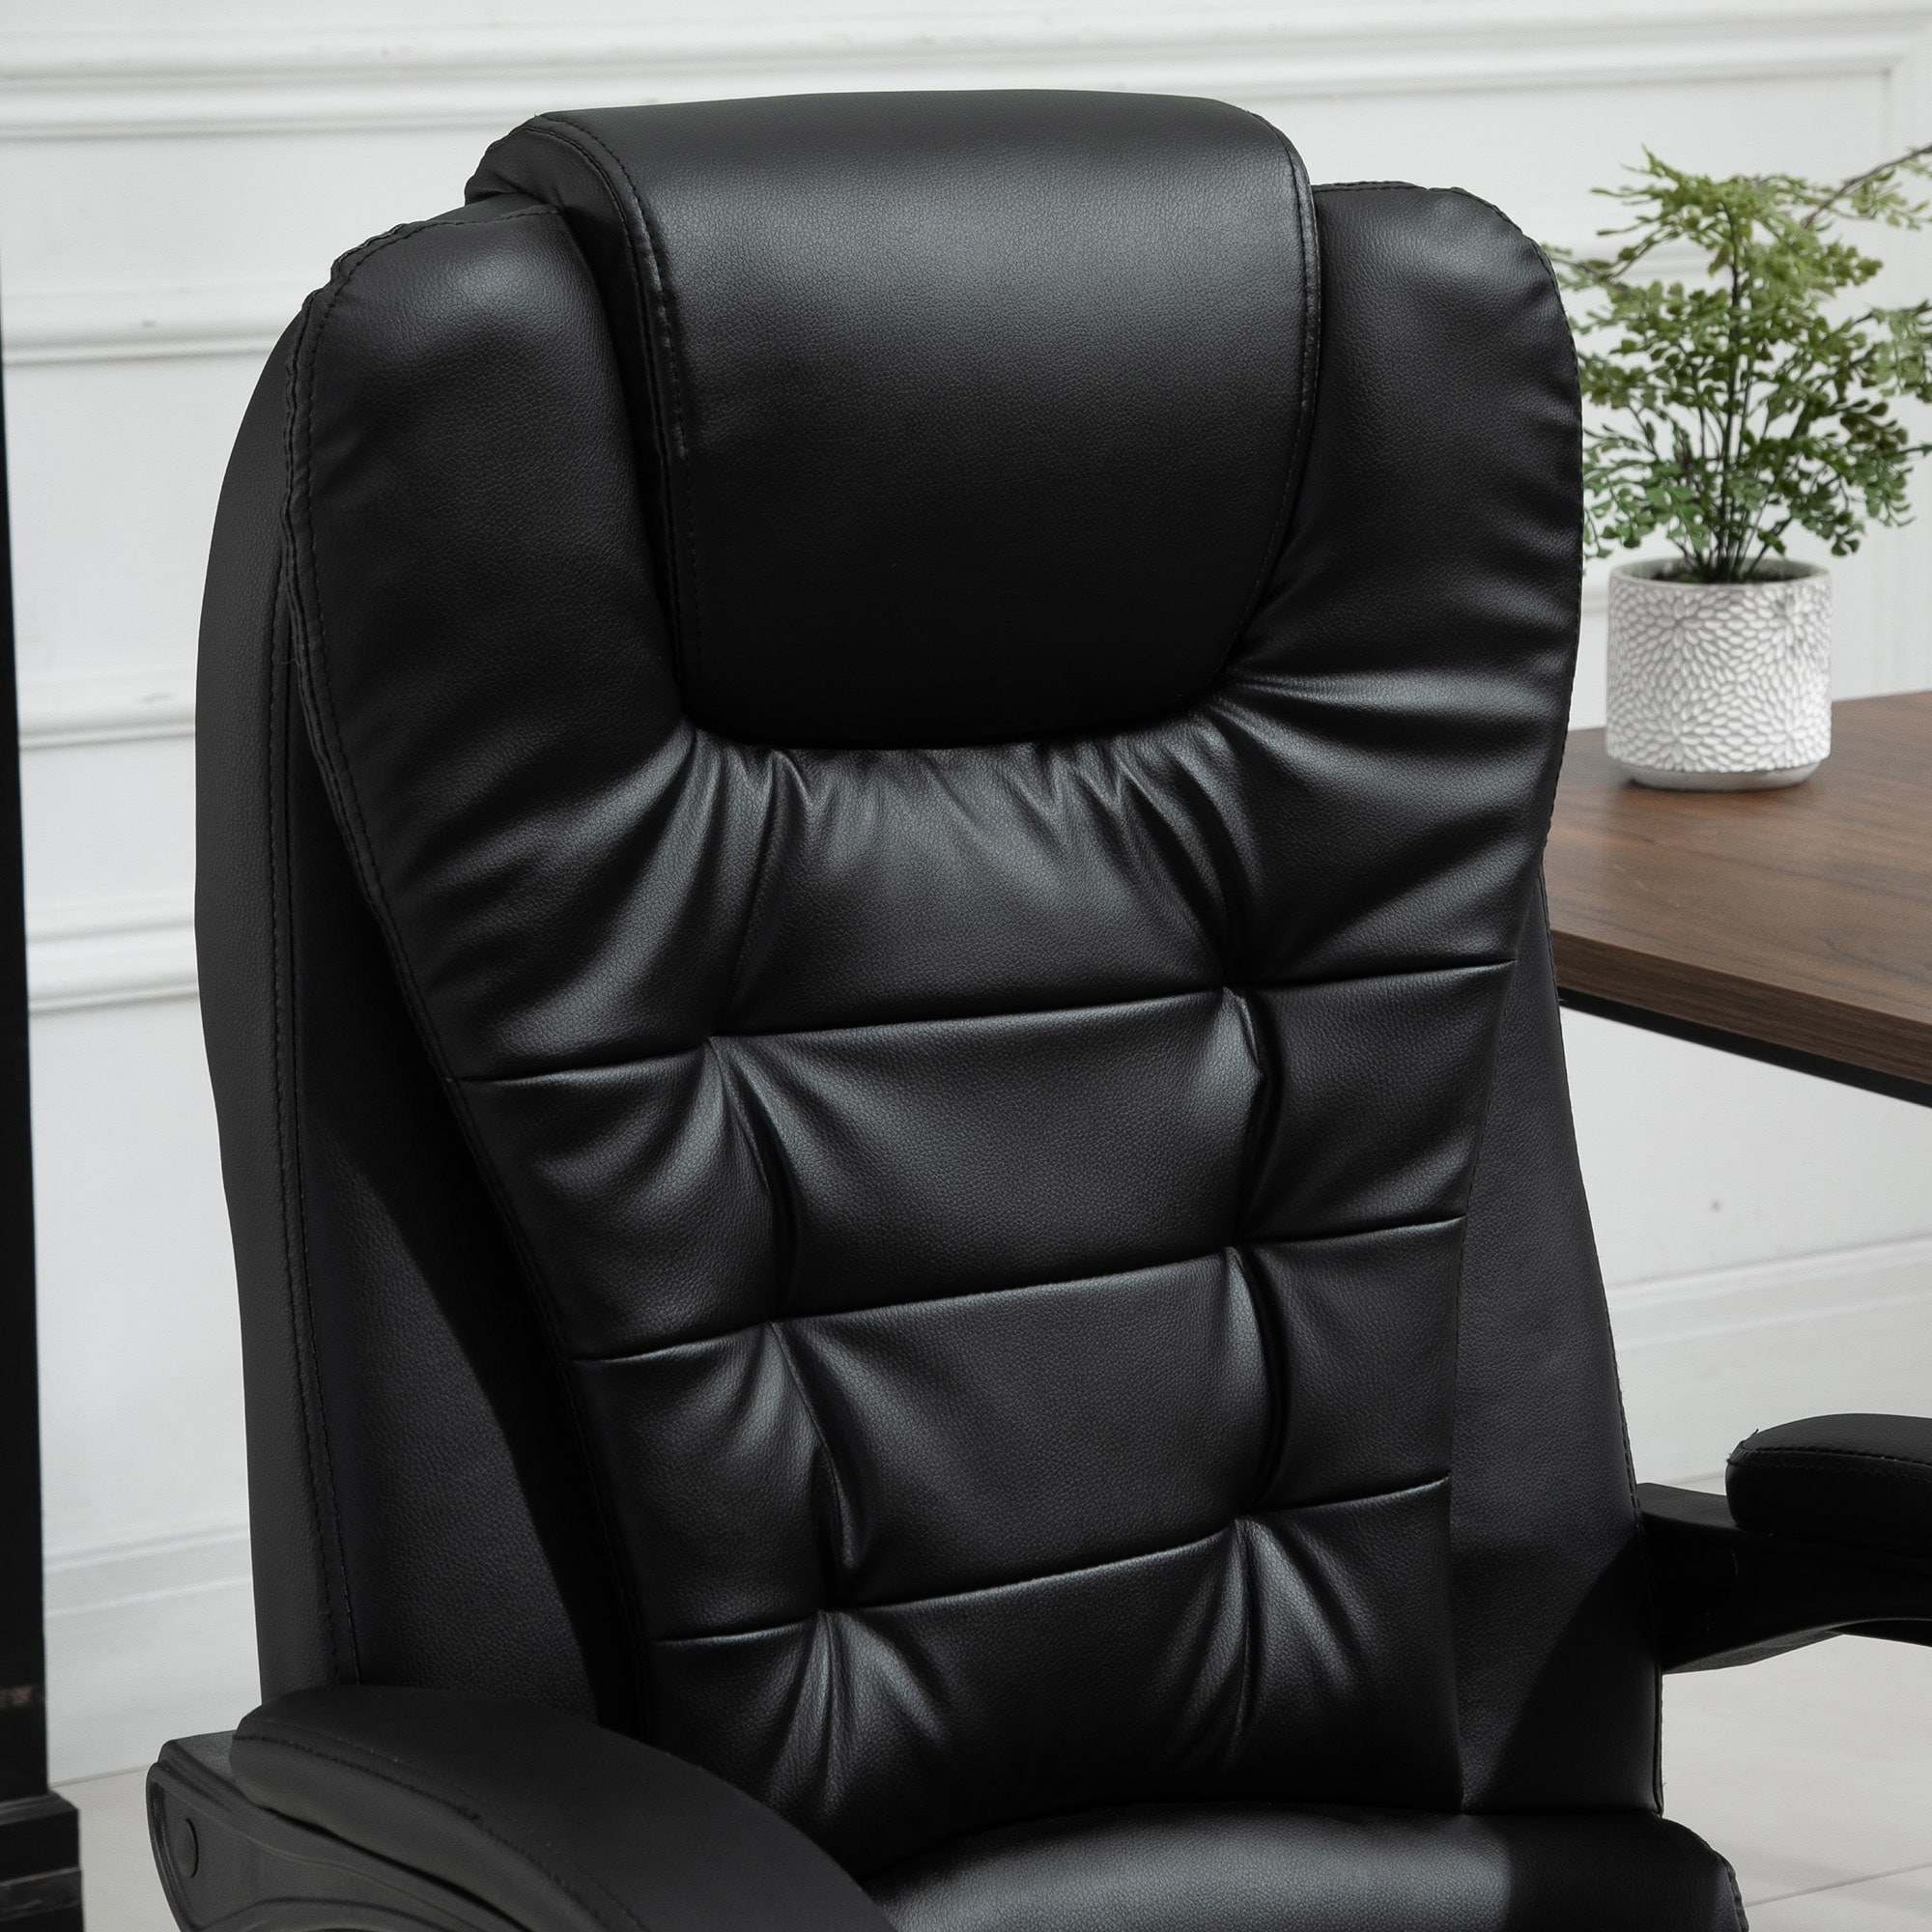 https://ak1.ostkcdn.com/images/products/is/images/direct/f9330f60696bc8cac4cec5463ff46f95671a0e73/Vinsetto-7-Point-Vibrating-Massage-Office-Chair-High-Back-Executive-Recliner-with-Lumbar-Support%2C-Footrest%2C-Reclining-Back.jpg